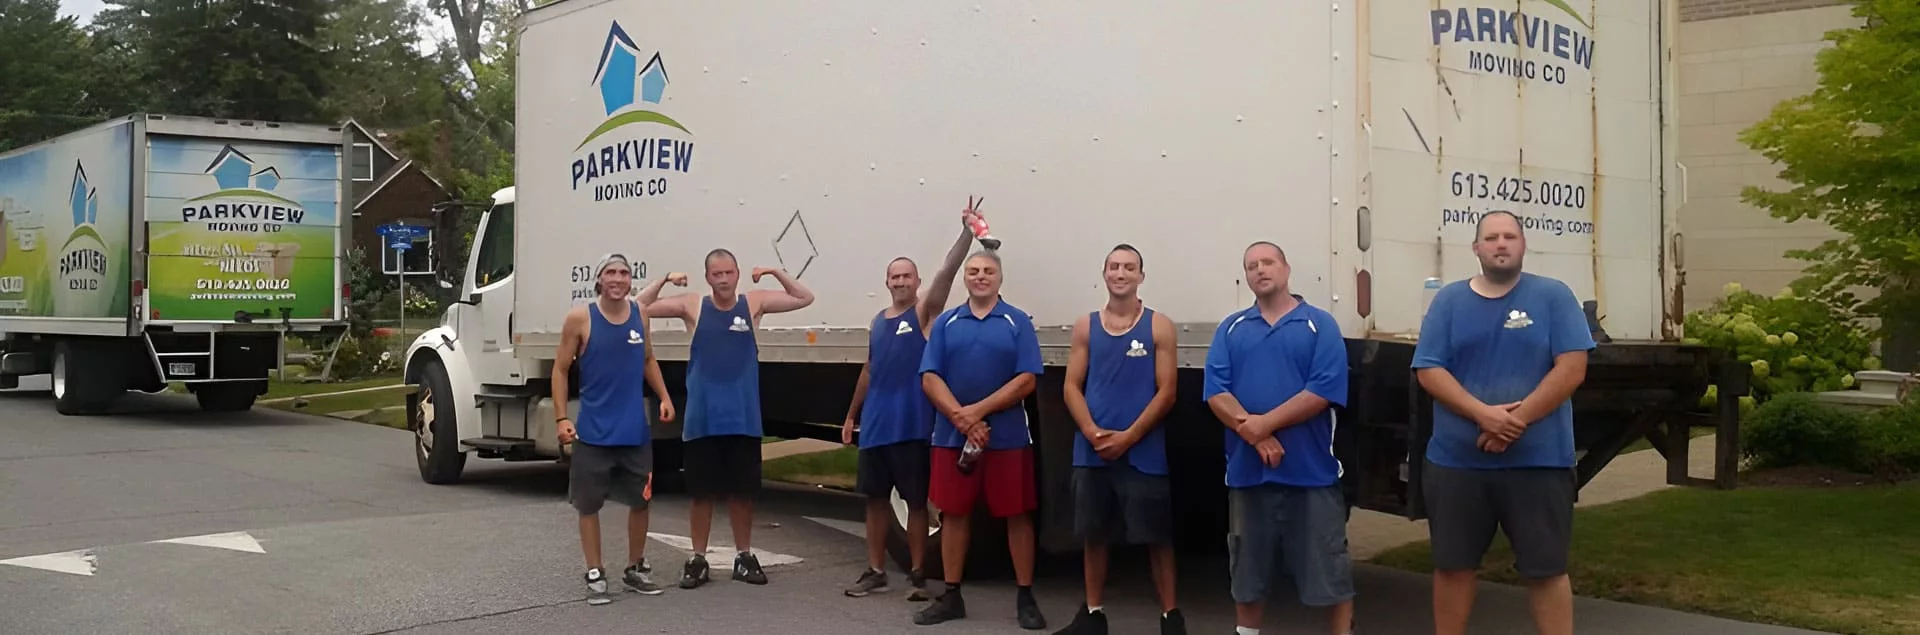 A group of movers about to board a moving truck.